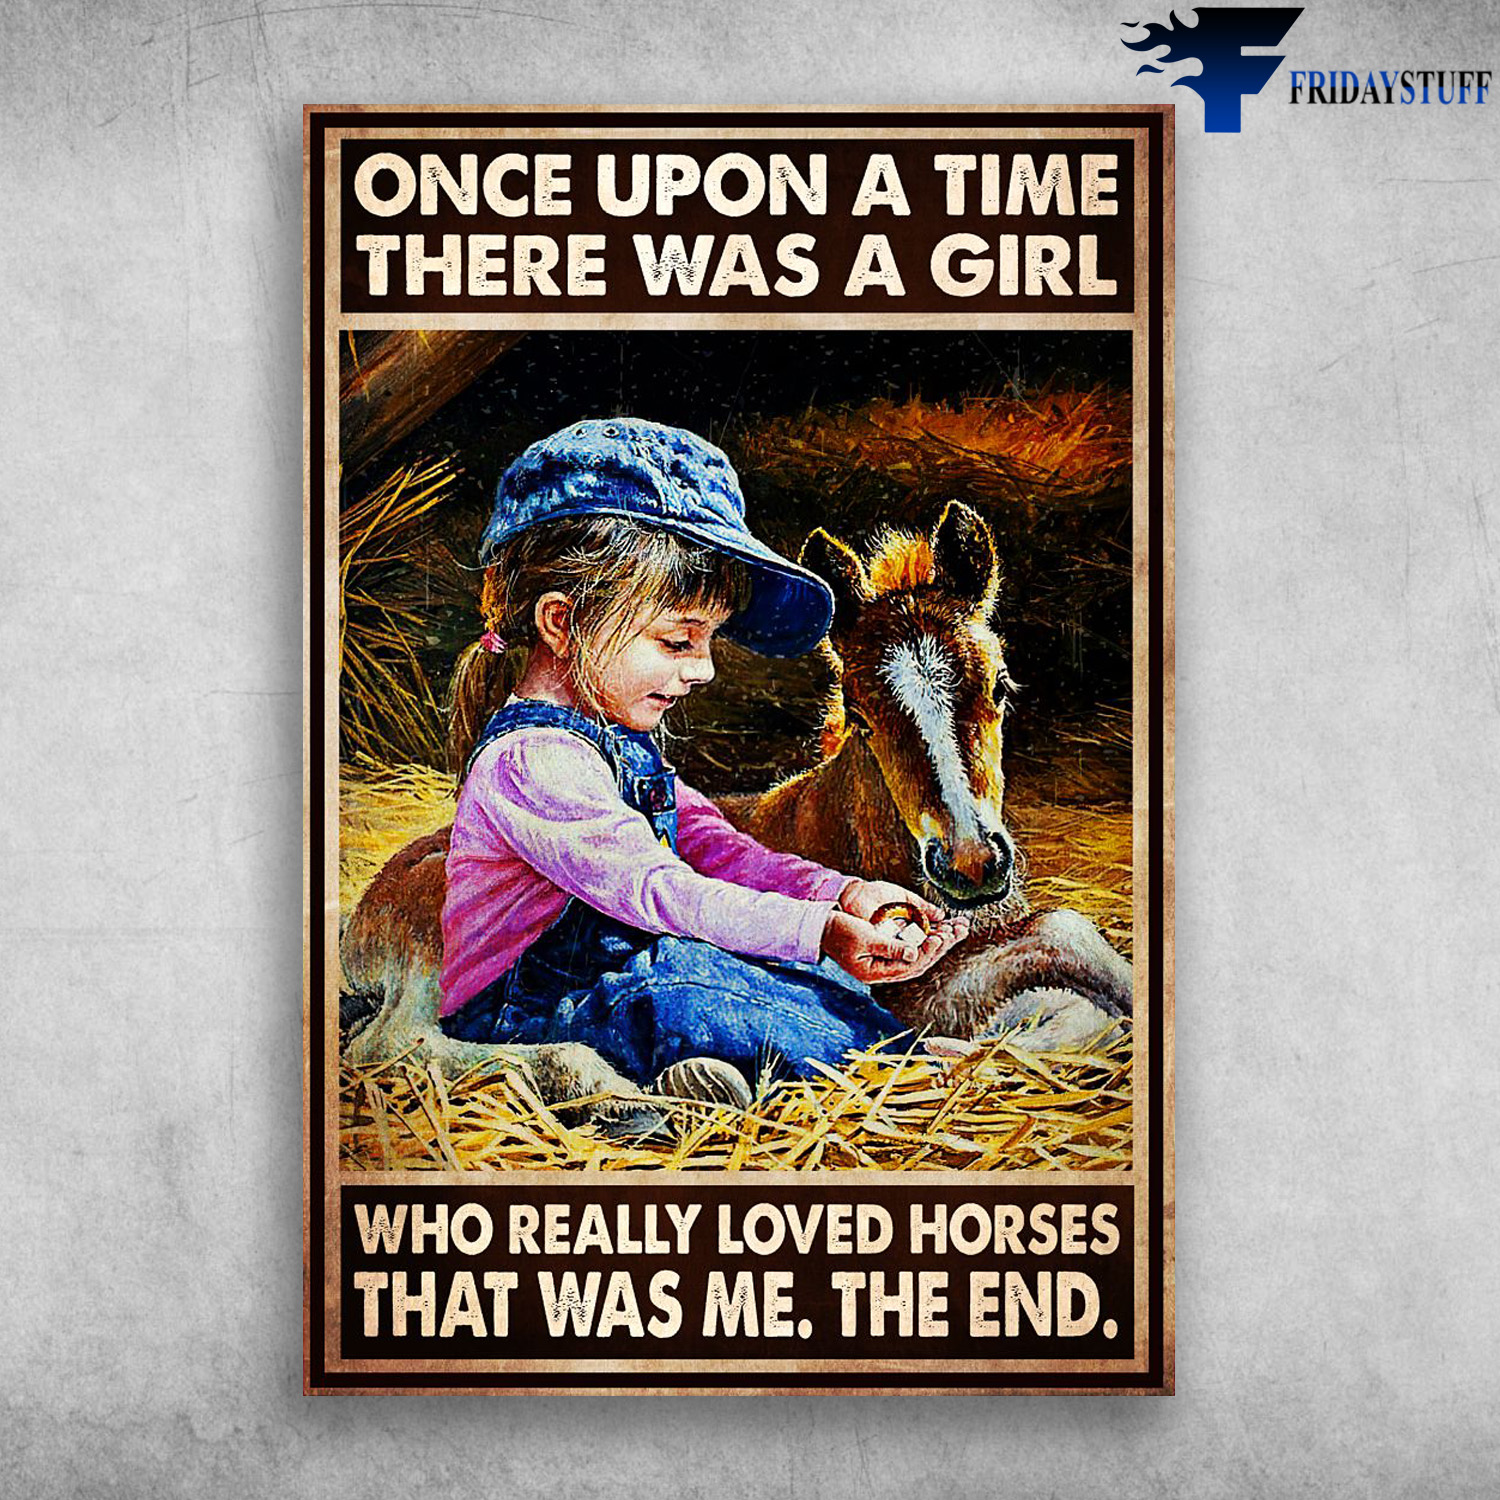 Little Girl And Horse - Once Upon A Time, There Was A Girl, Who Really Loved Horses, That Was Me, The End